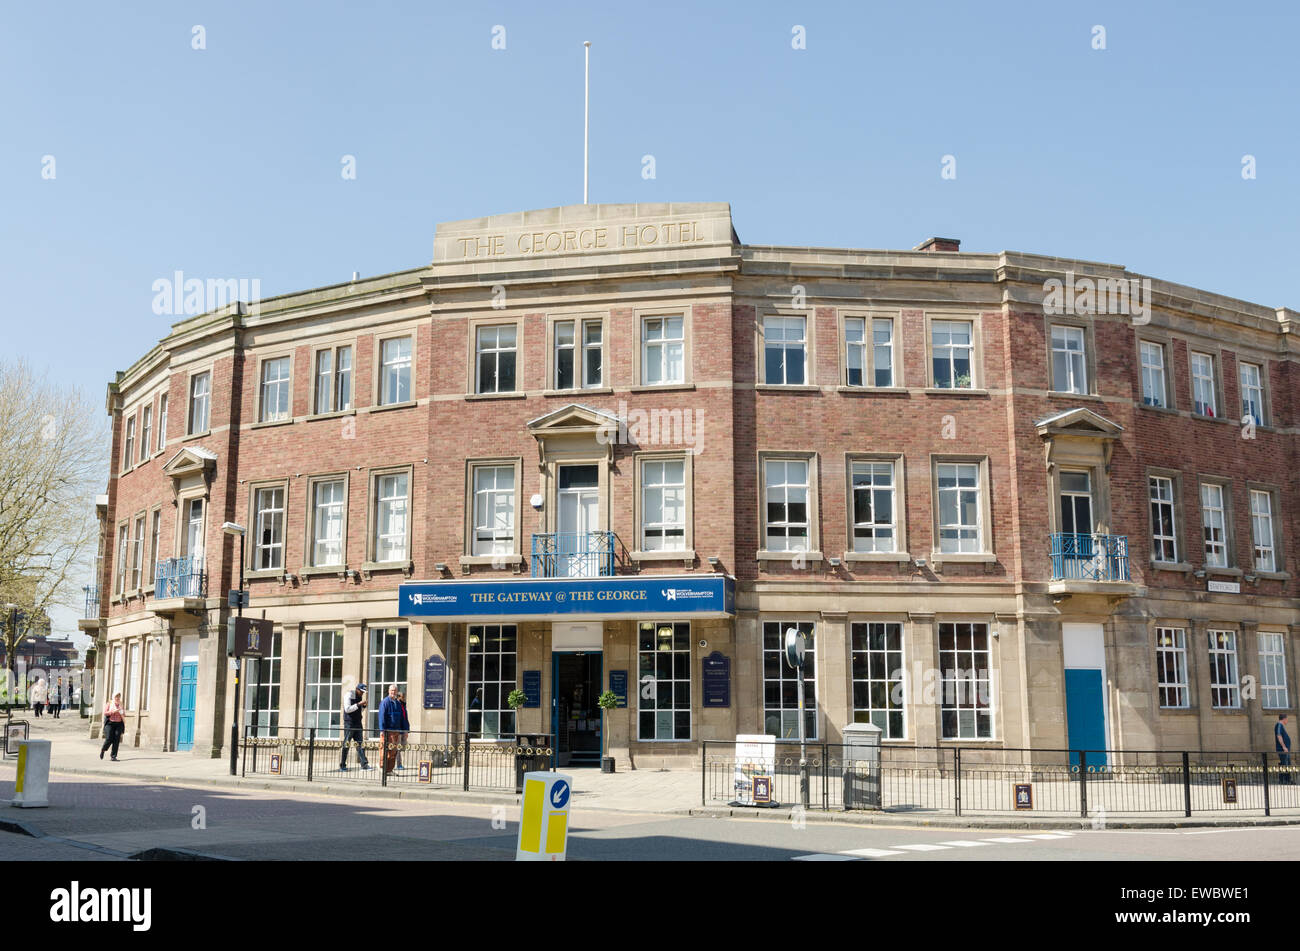 The former George Hotel Building in the centre of Wolverhampton which now houses tthe University of Wolverhampton's Gateway Stock Photo